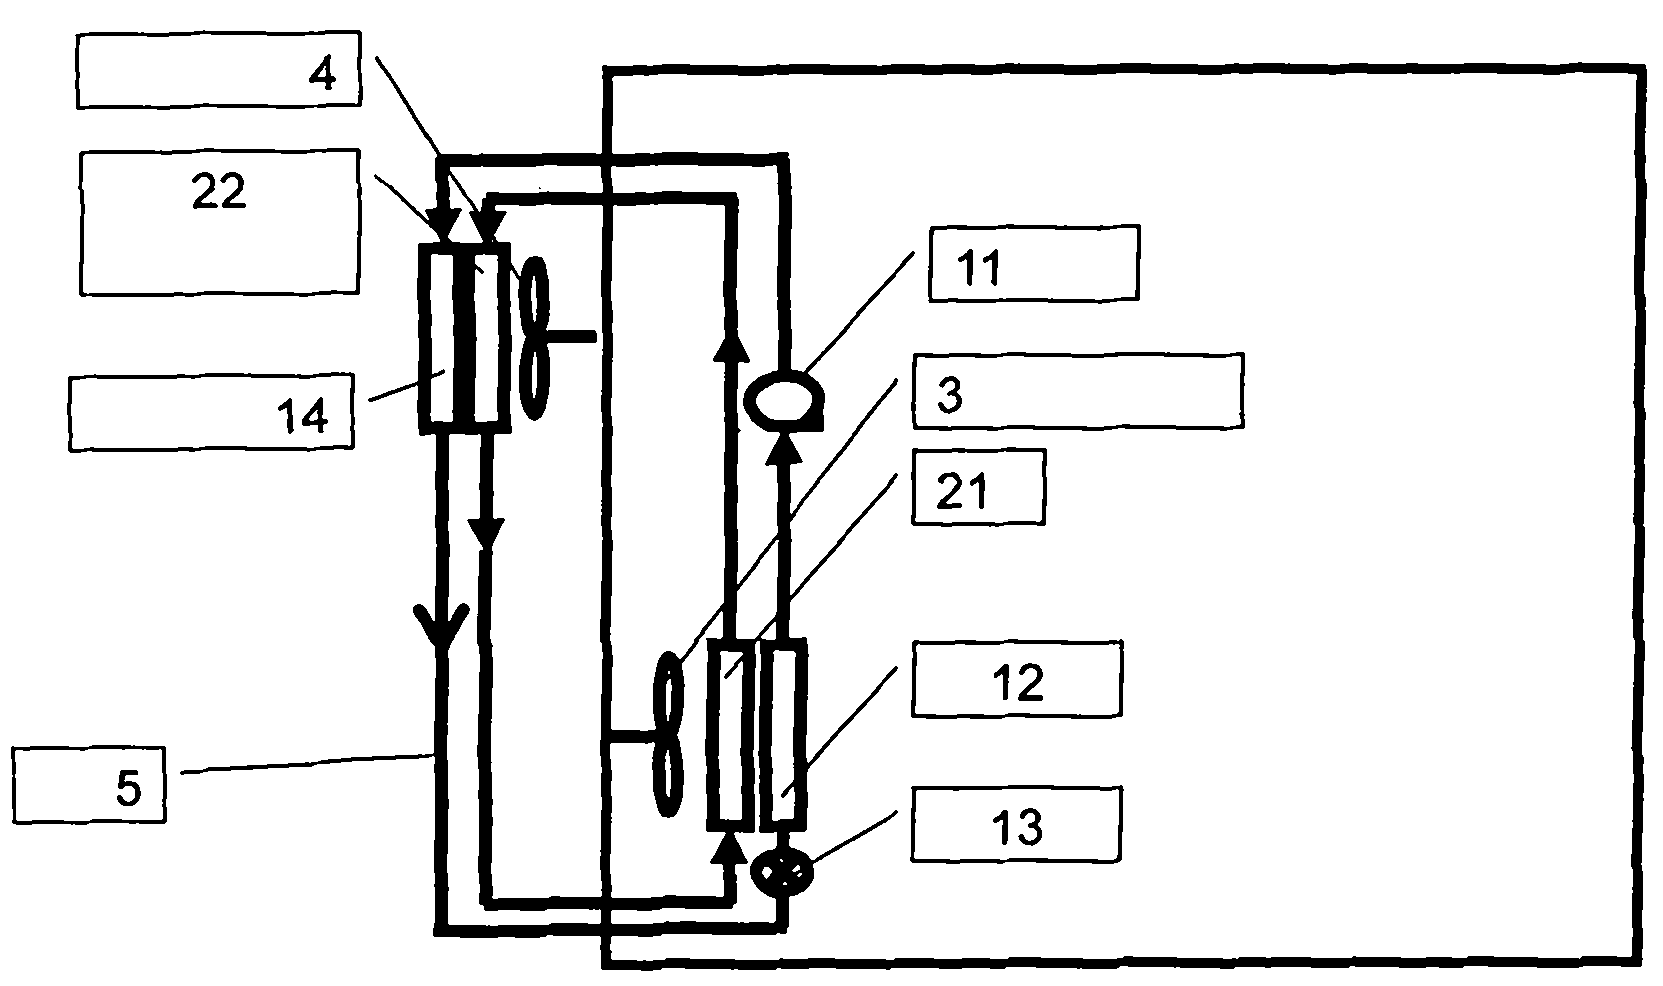 Double-cold source integrated air-conditioning system